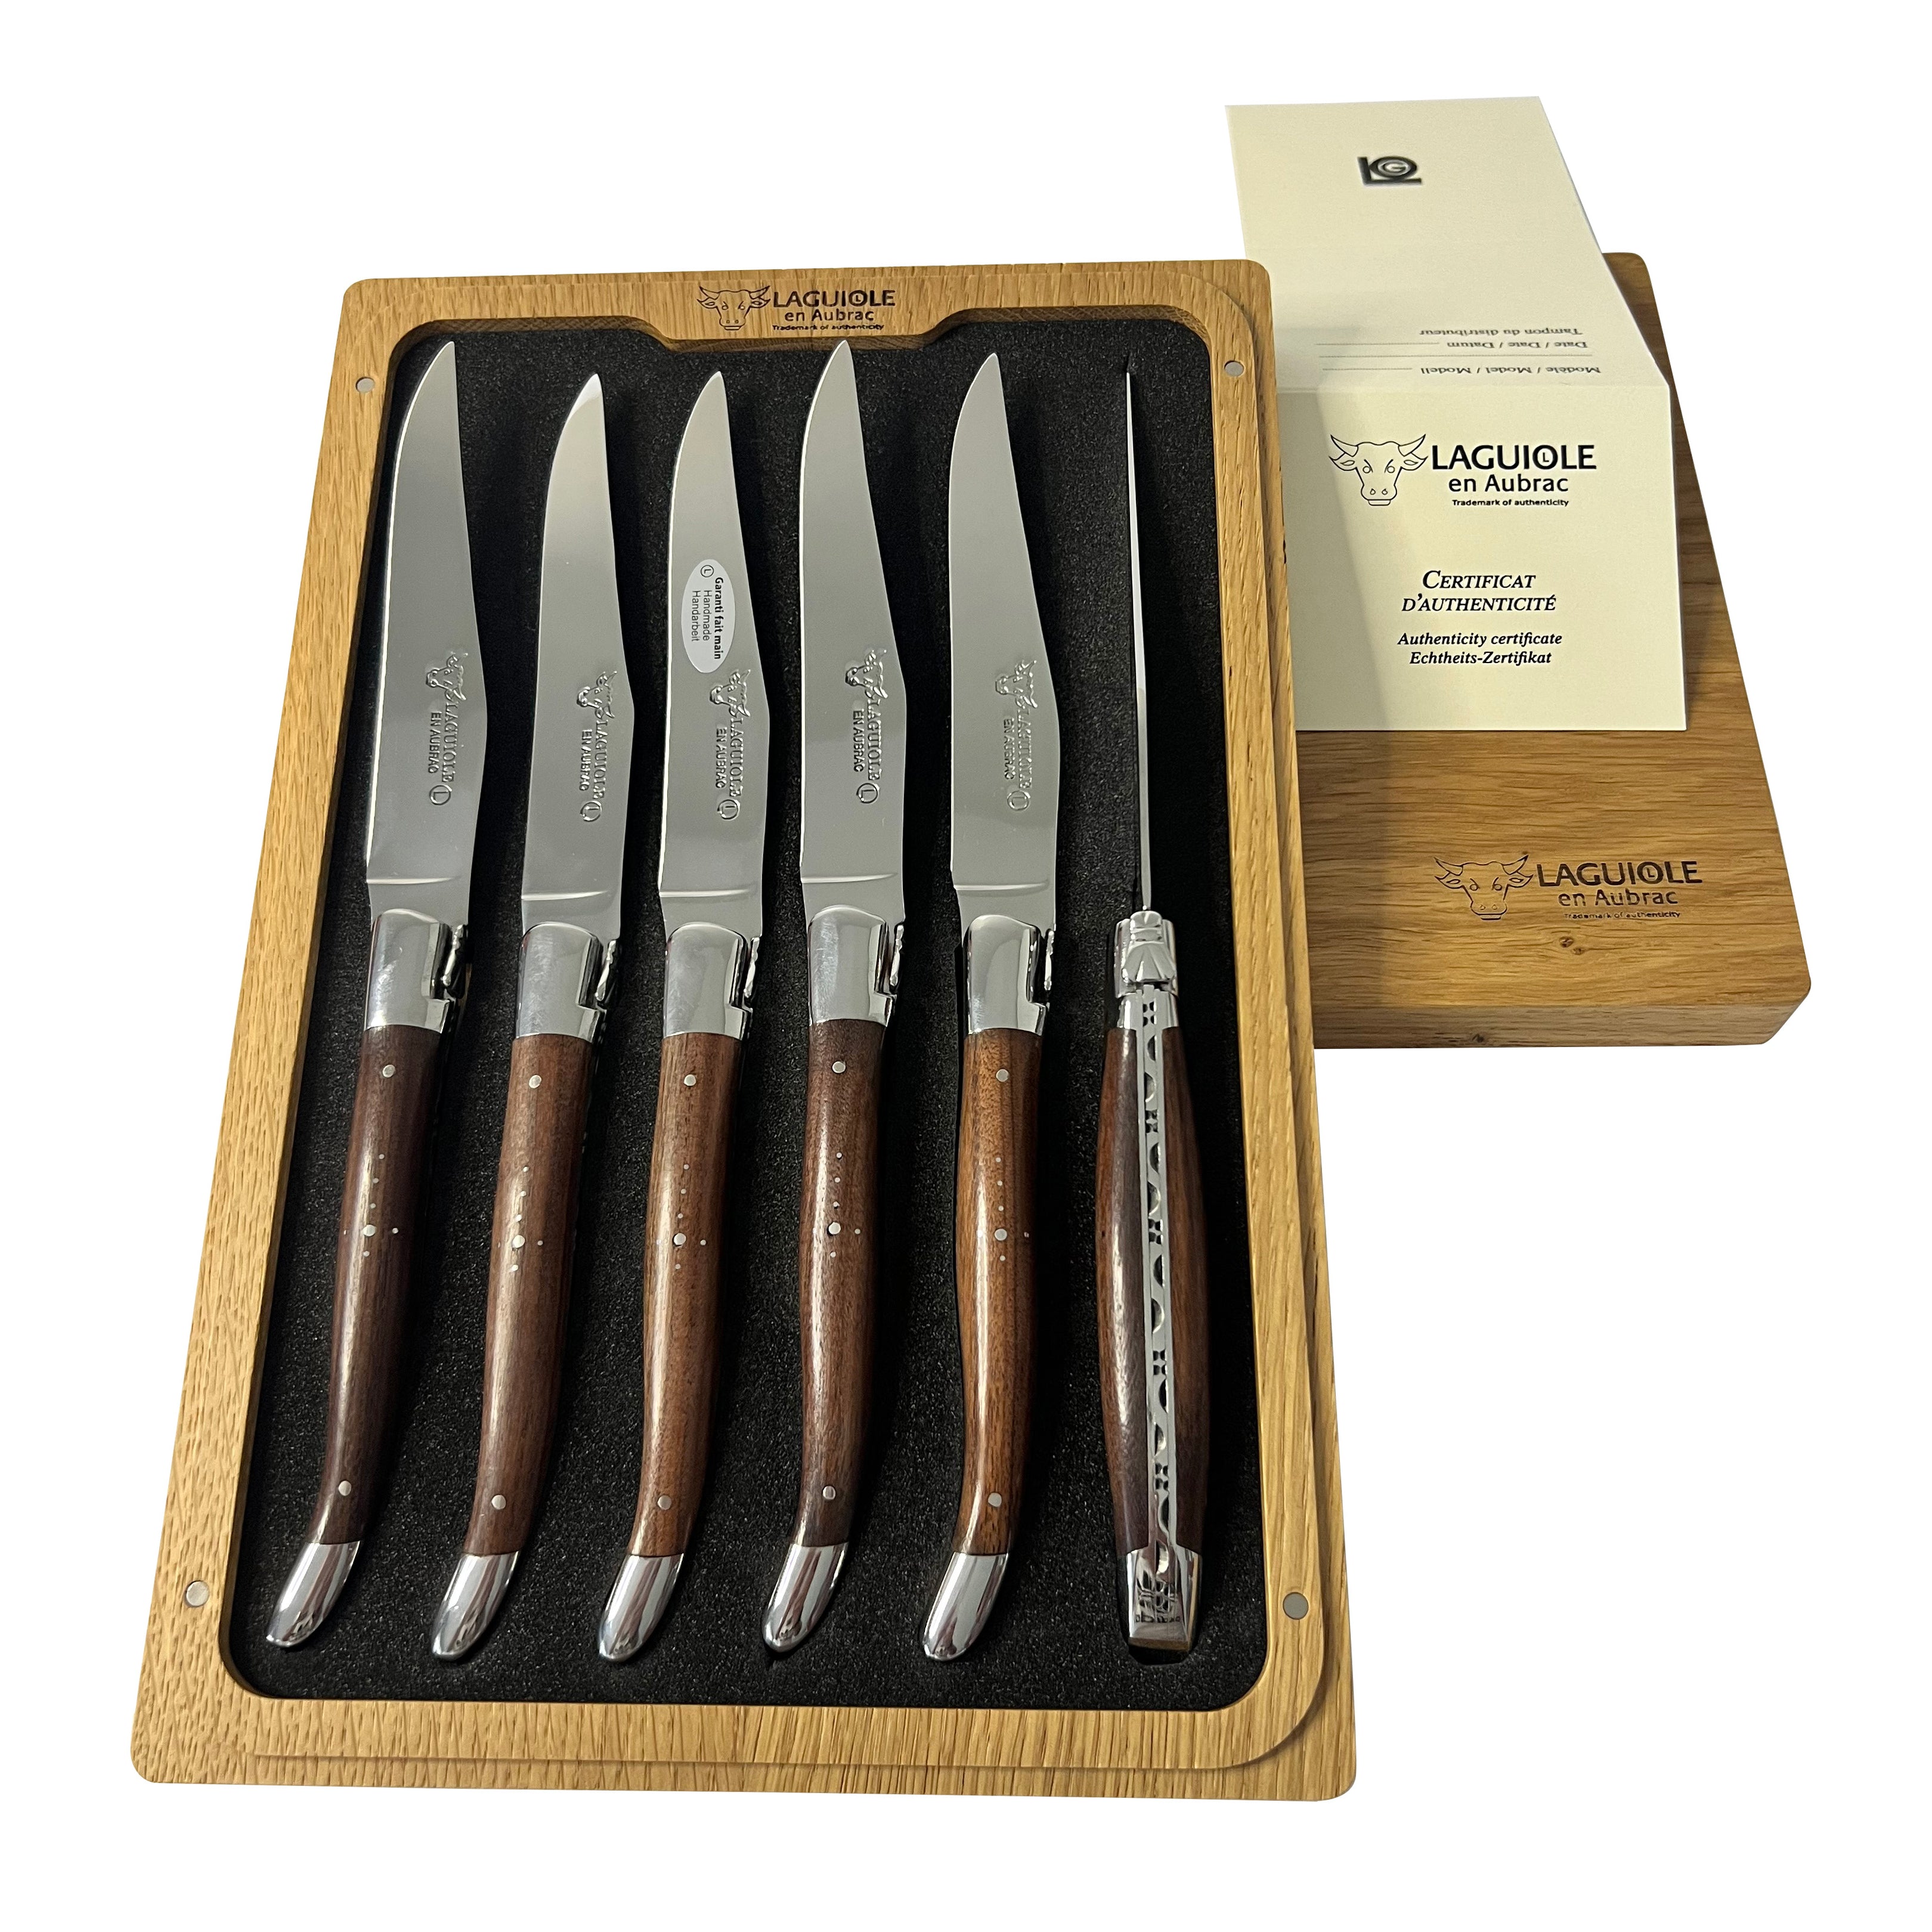 Laguiole en Aubrac Handcrafted Plated 6-Piece Steak Knife Set with Morado  Rosewood Handles, Polished Bolsters